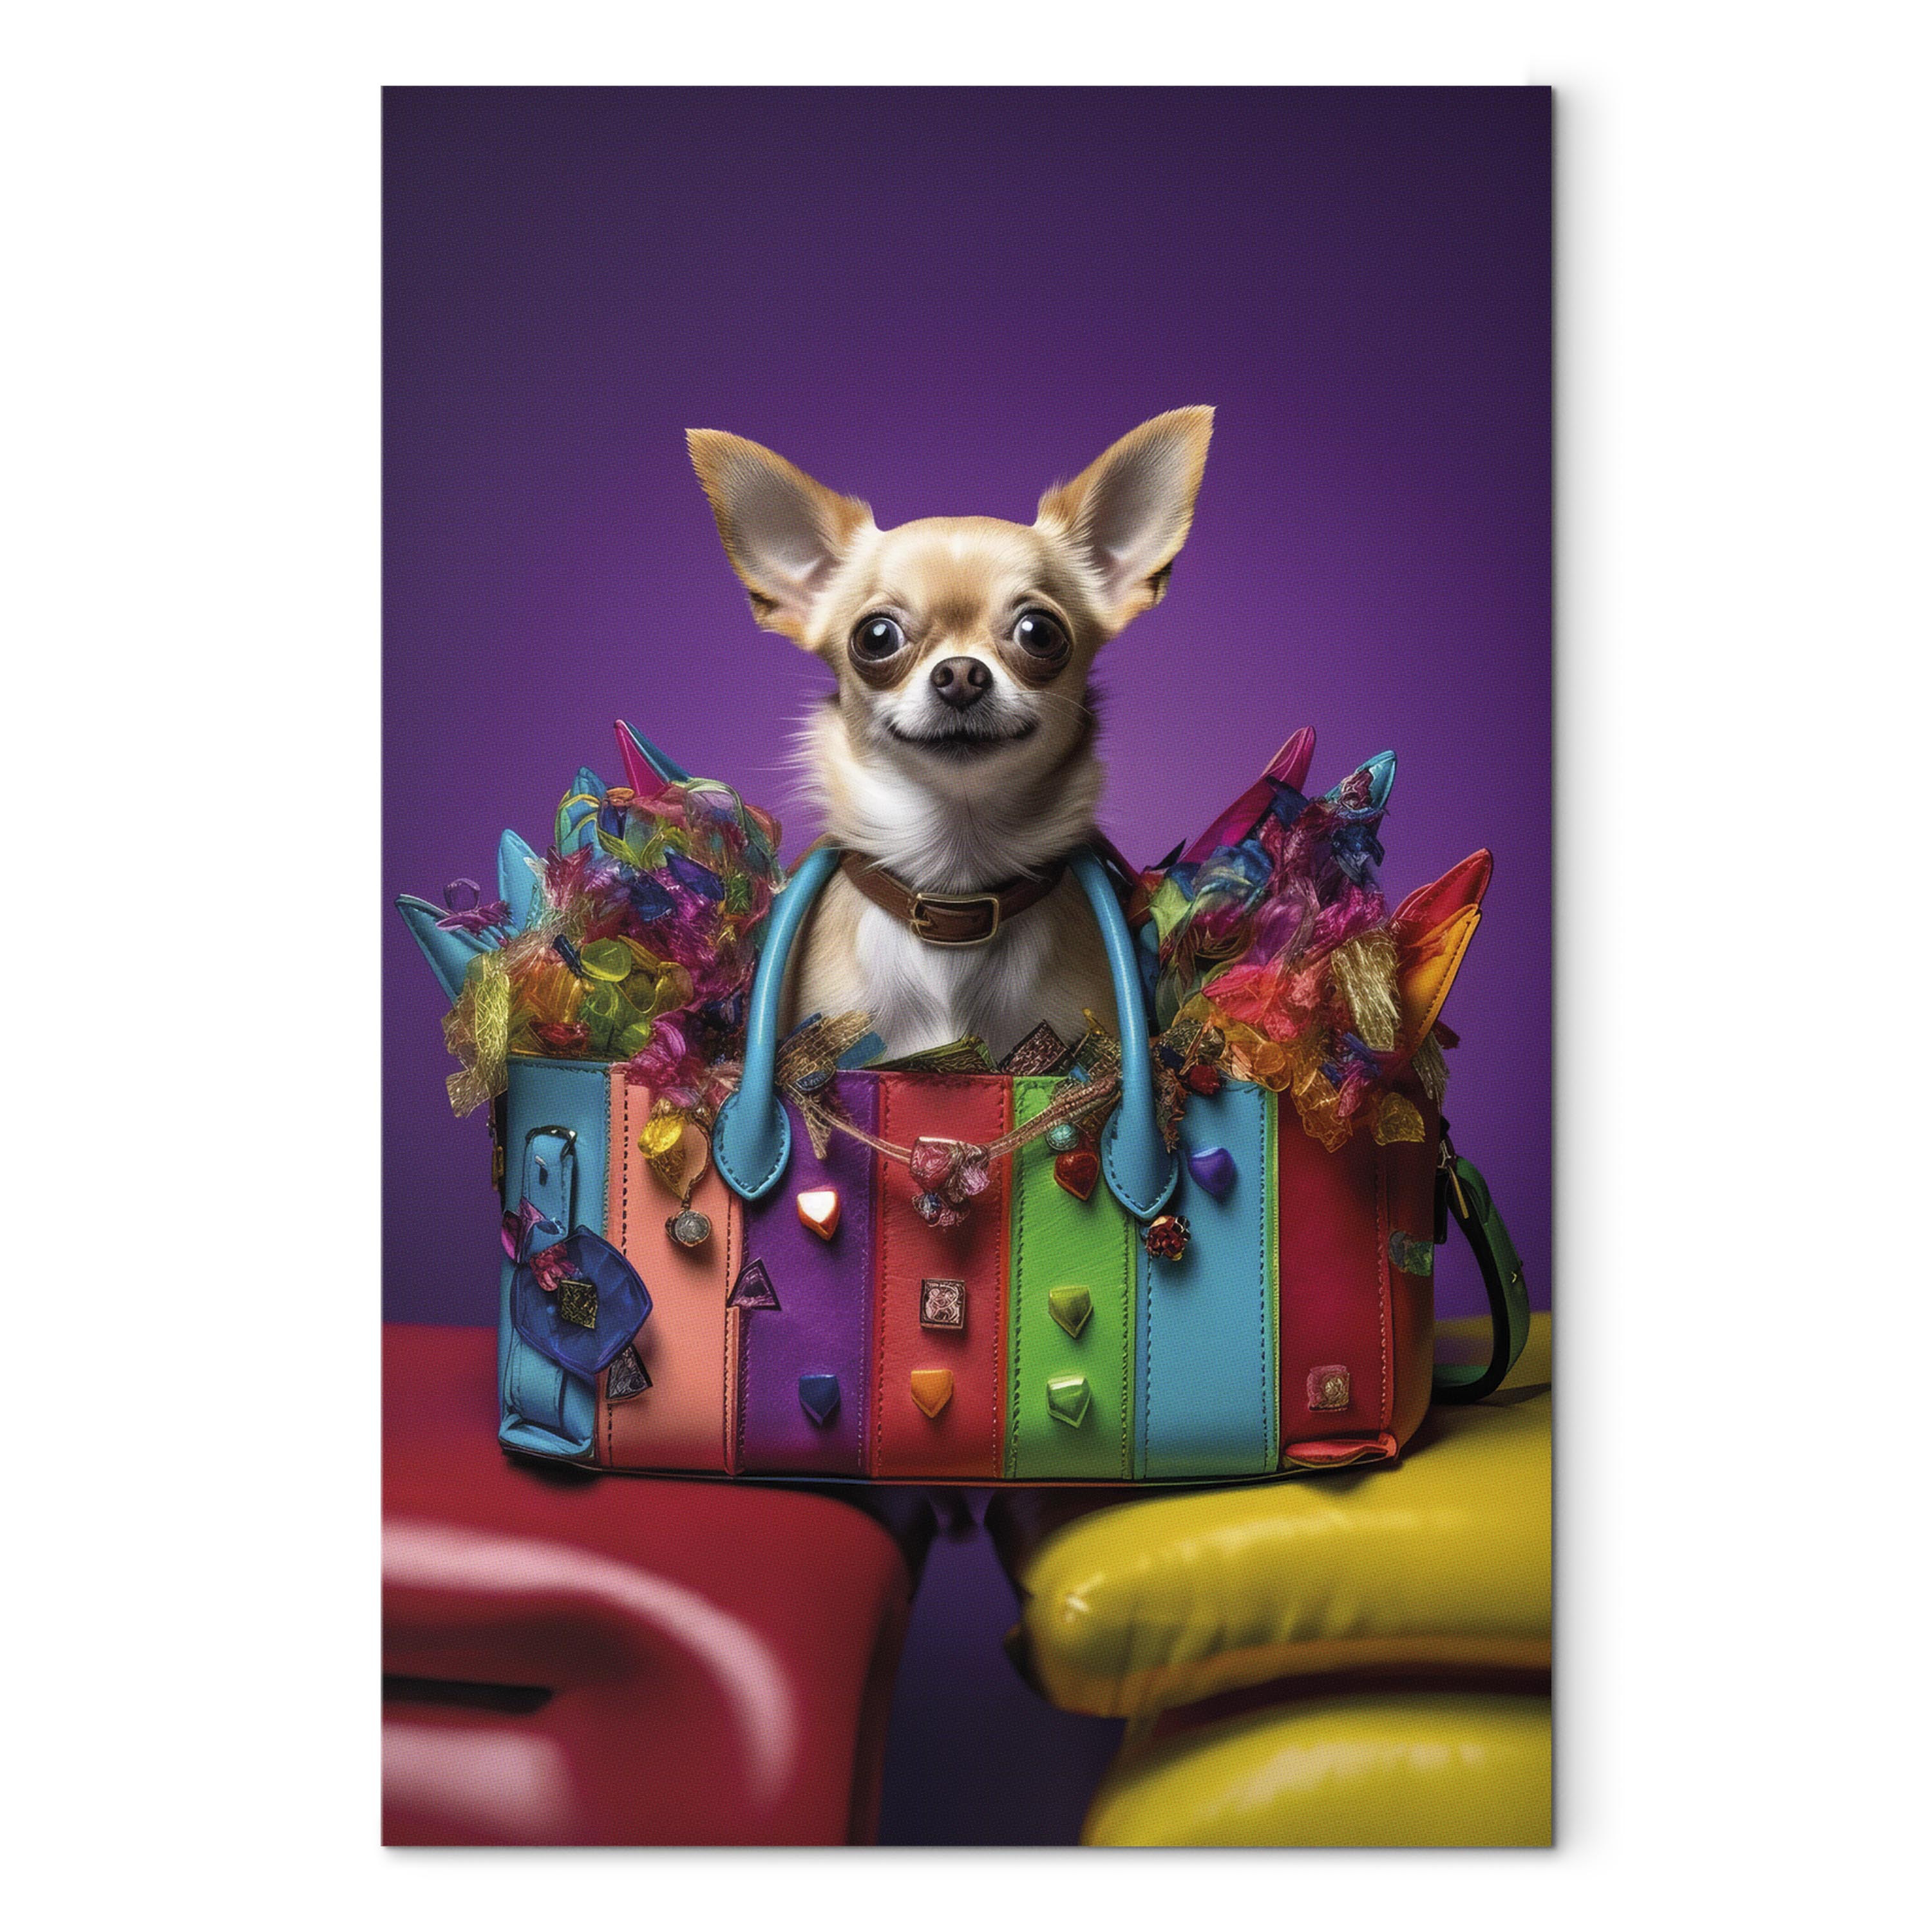 Welcome to My Bag - Chihuahua & Louis Vuitton, an art canvas by